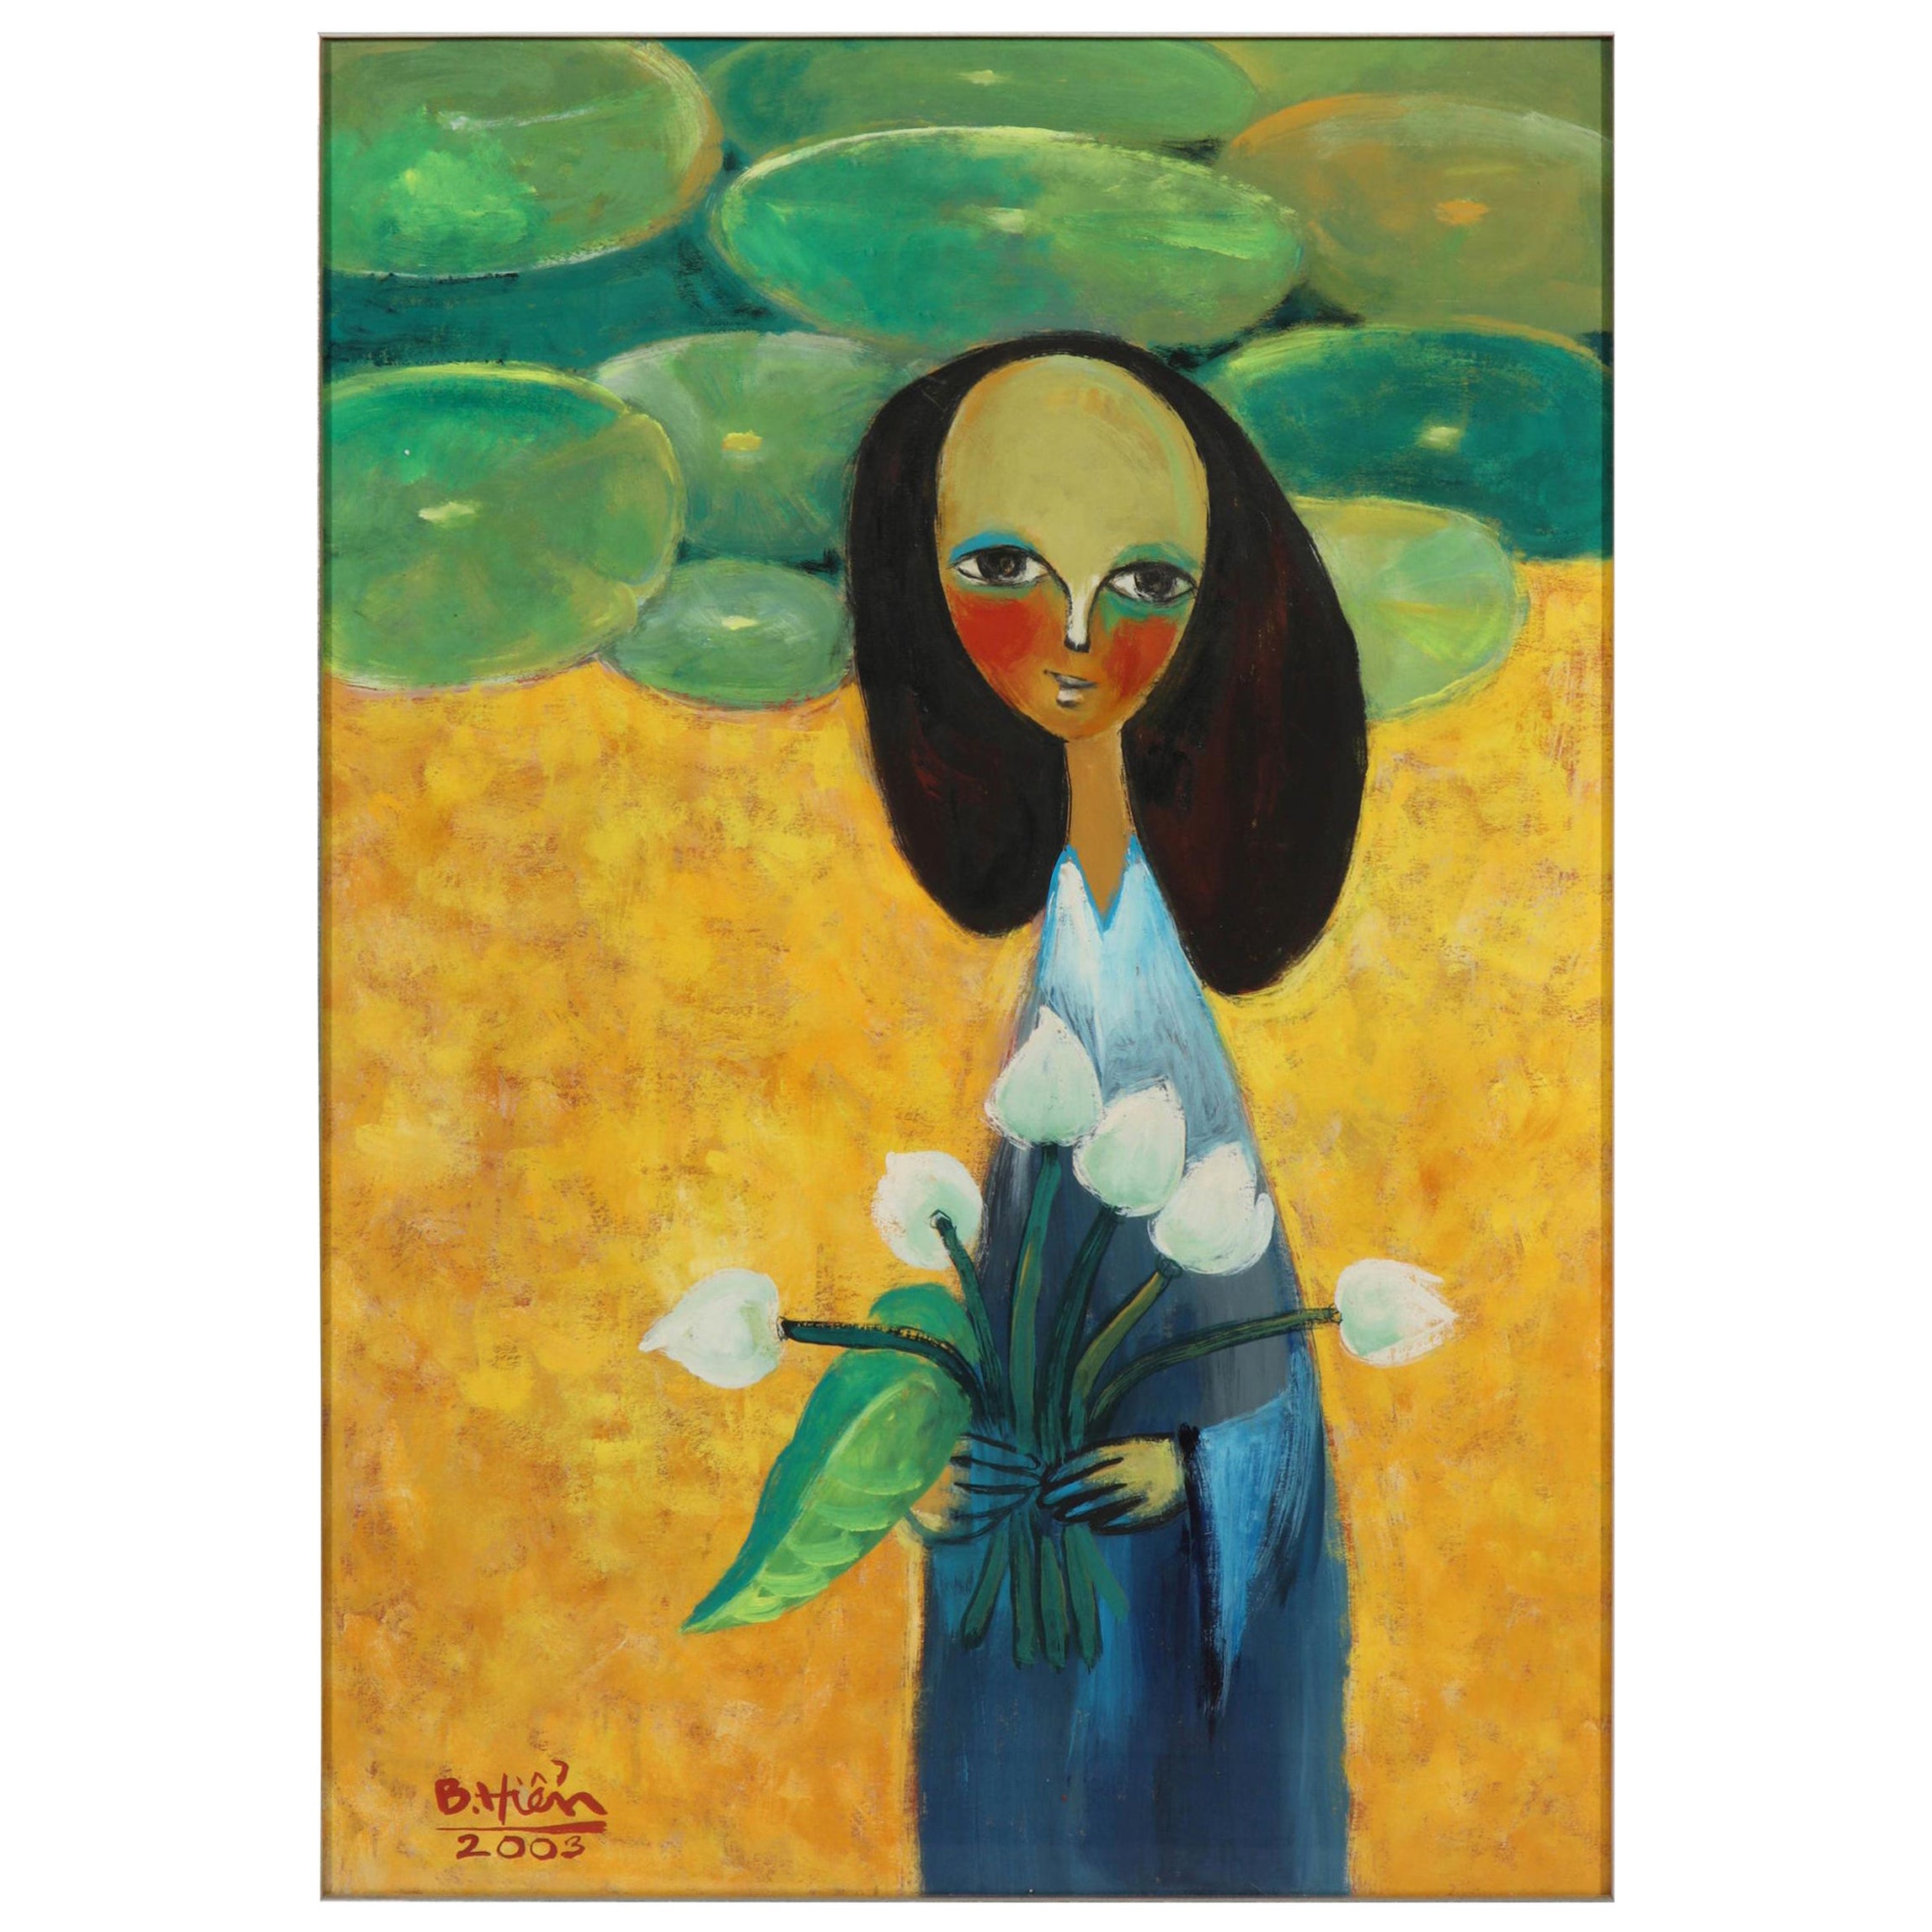 Painting of a Lady with Flowers, Green, Yellow and Blue, On Paper, Hanoi Artist